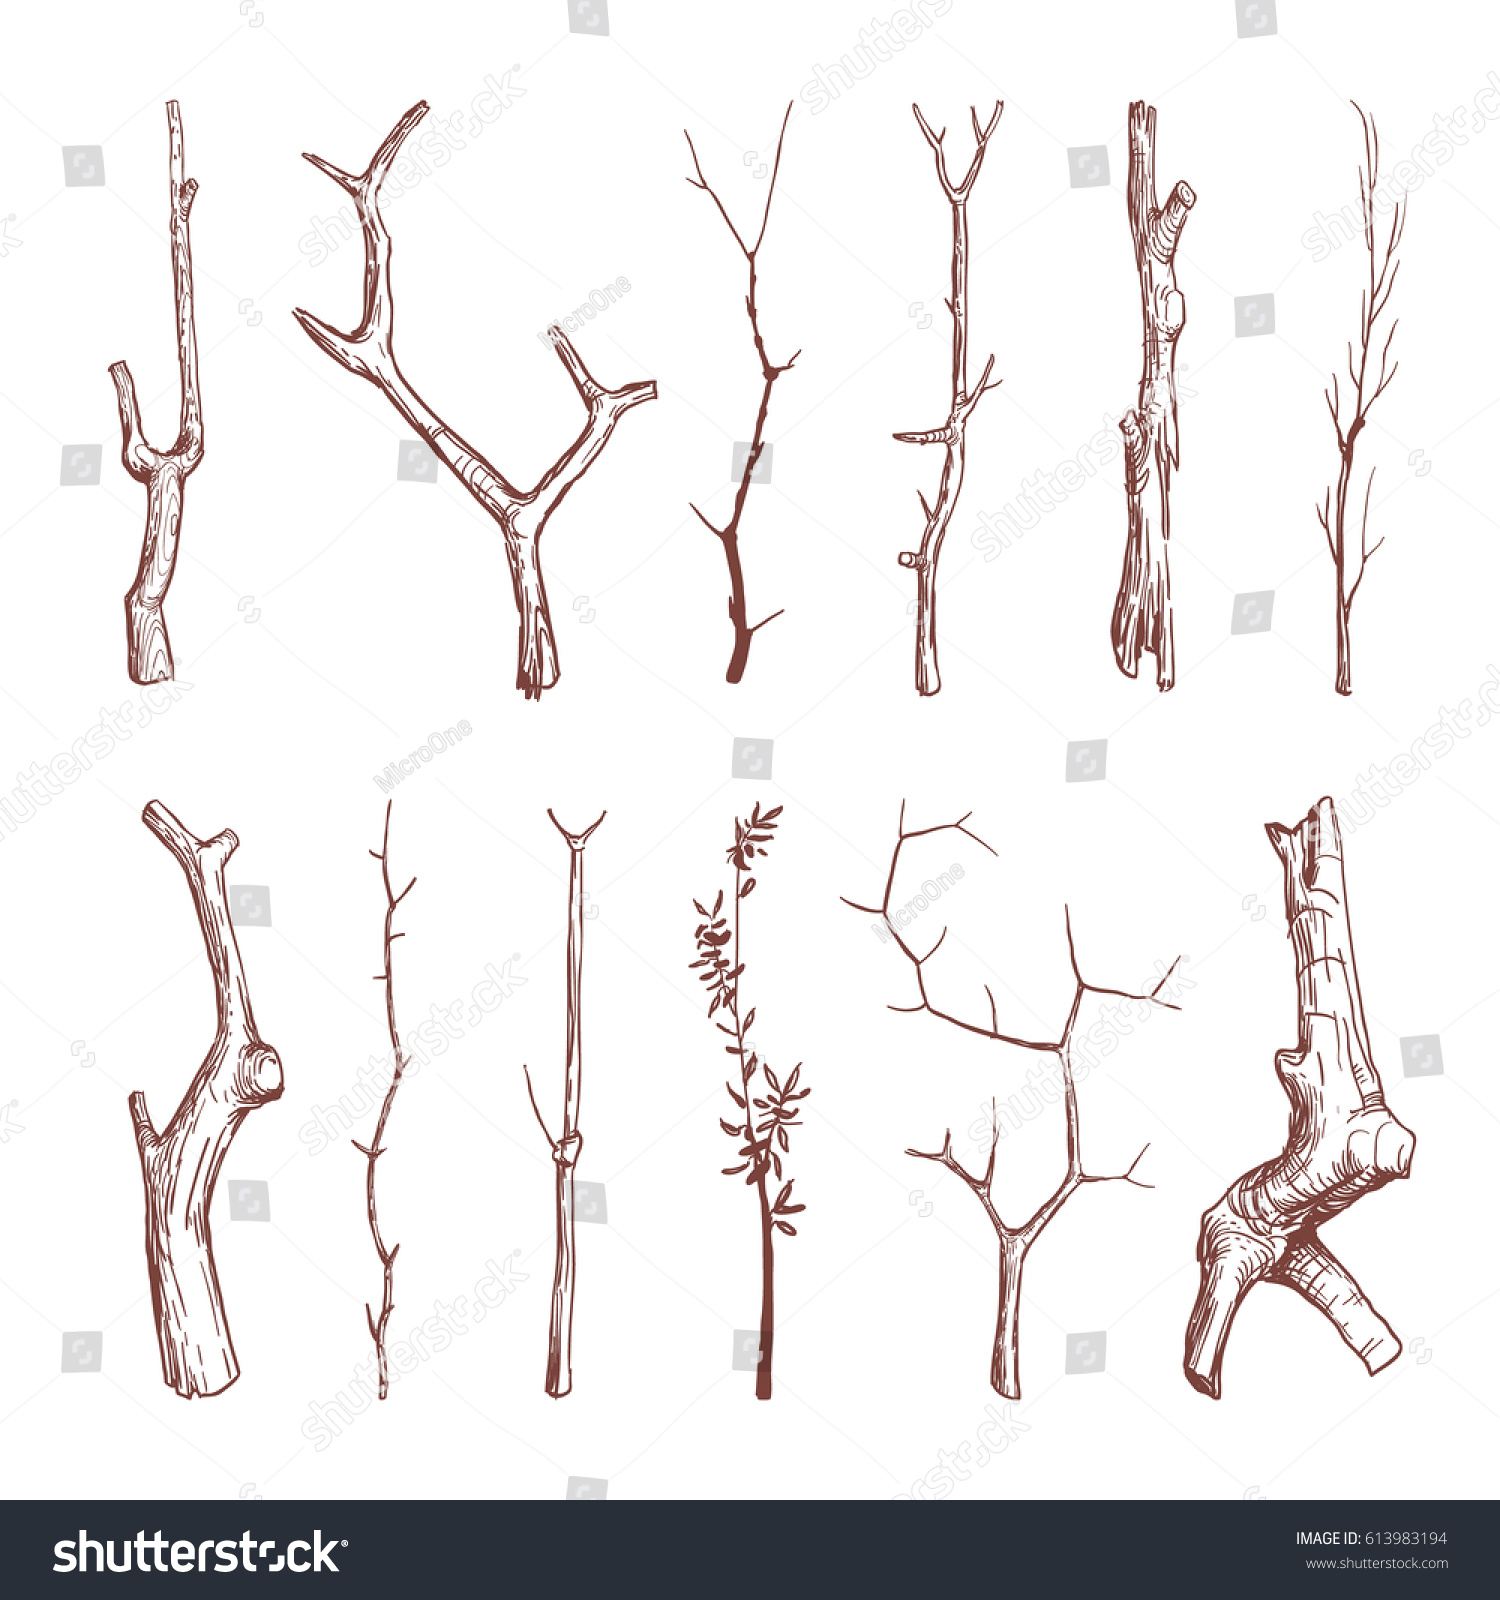 Hand Drawn Wood Twigs Wooden Sticks Stock Vector 613983194 ...